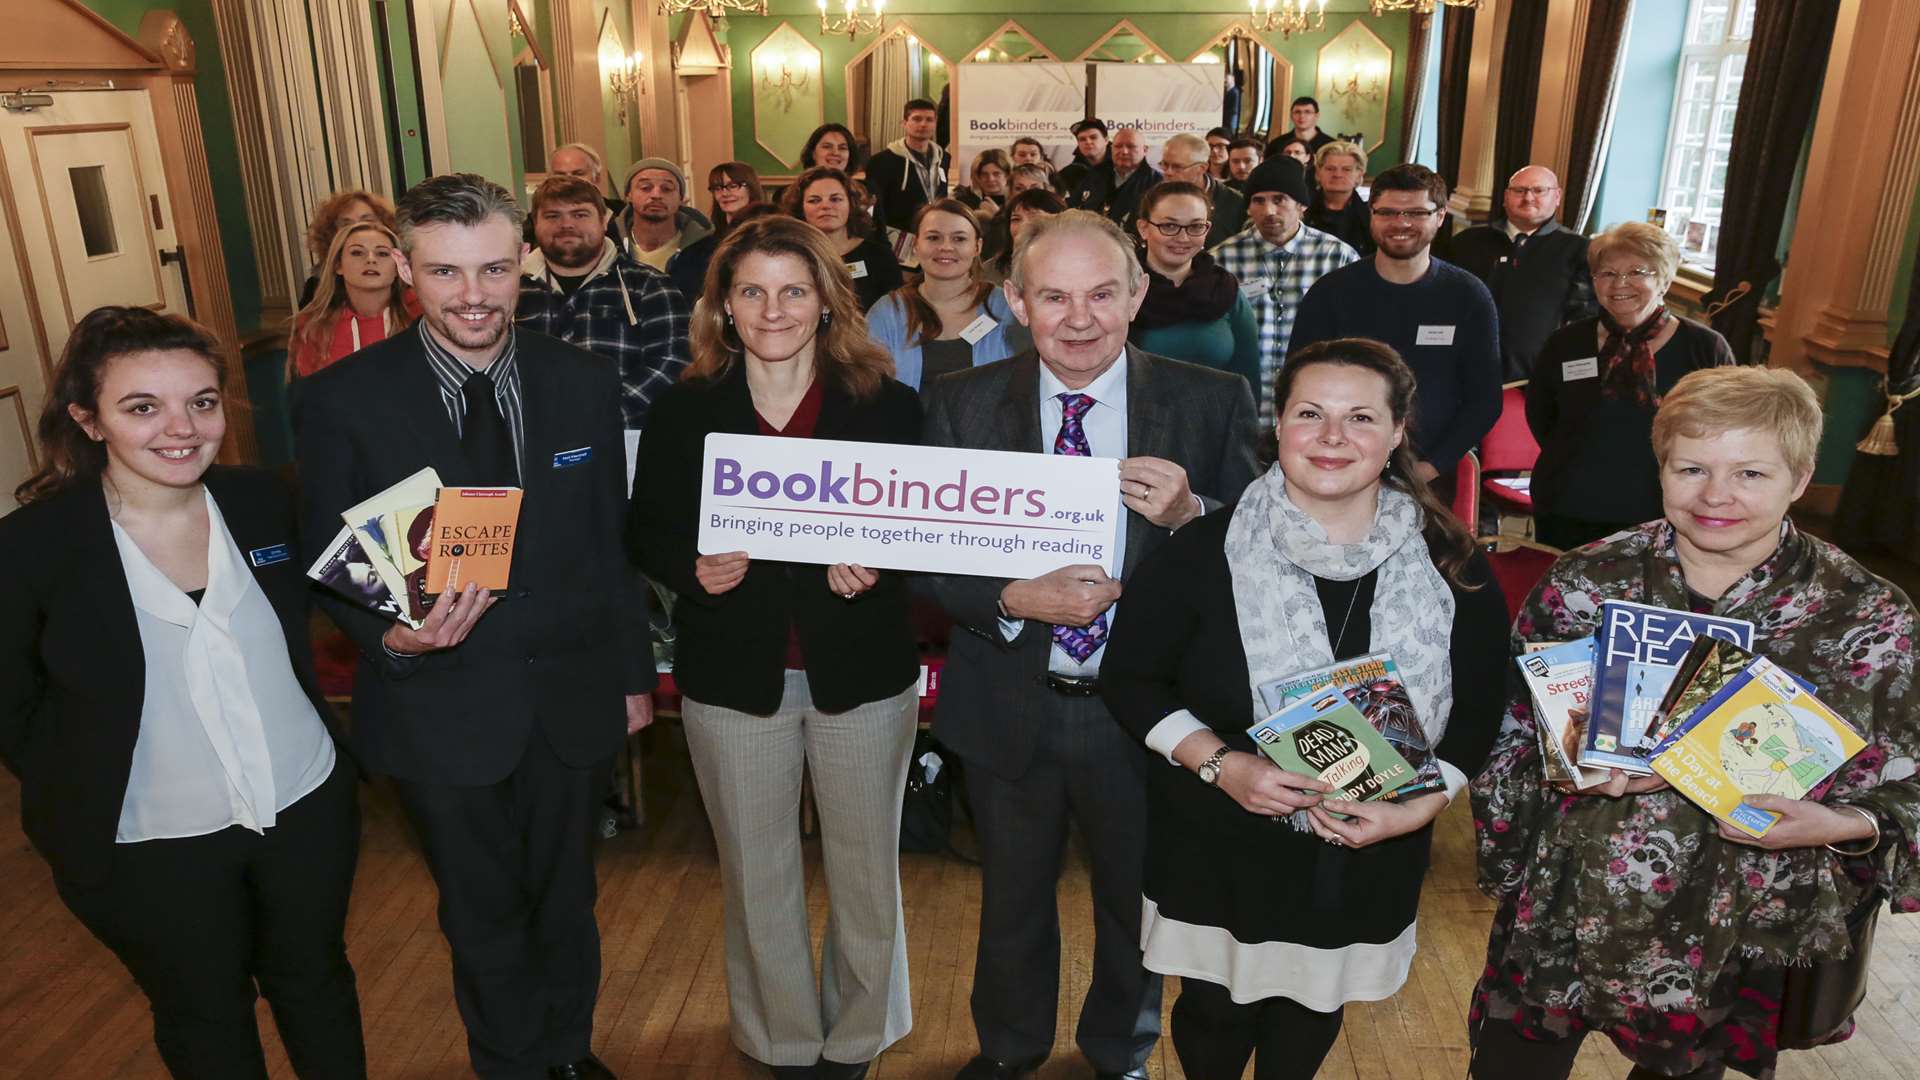 Launch event of the BookBinders scheme at the Abbots Barton Hotel in Canterbury.